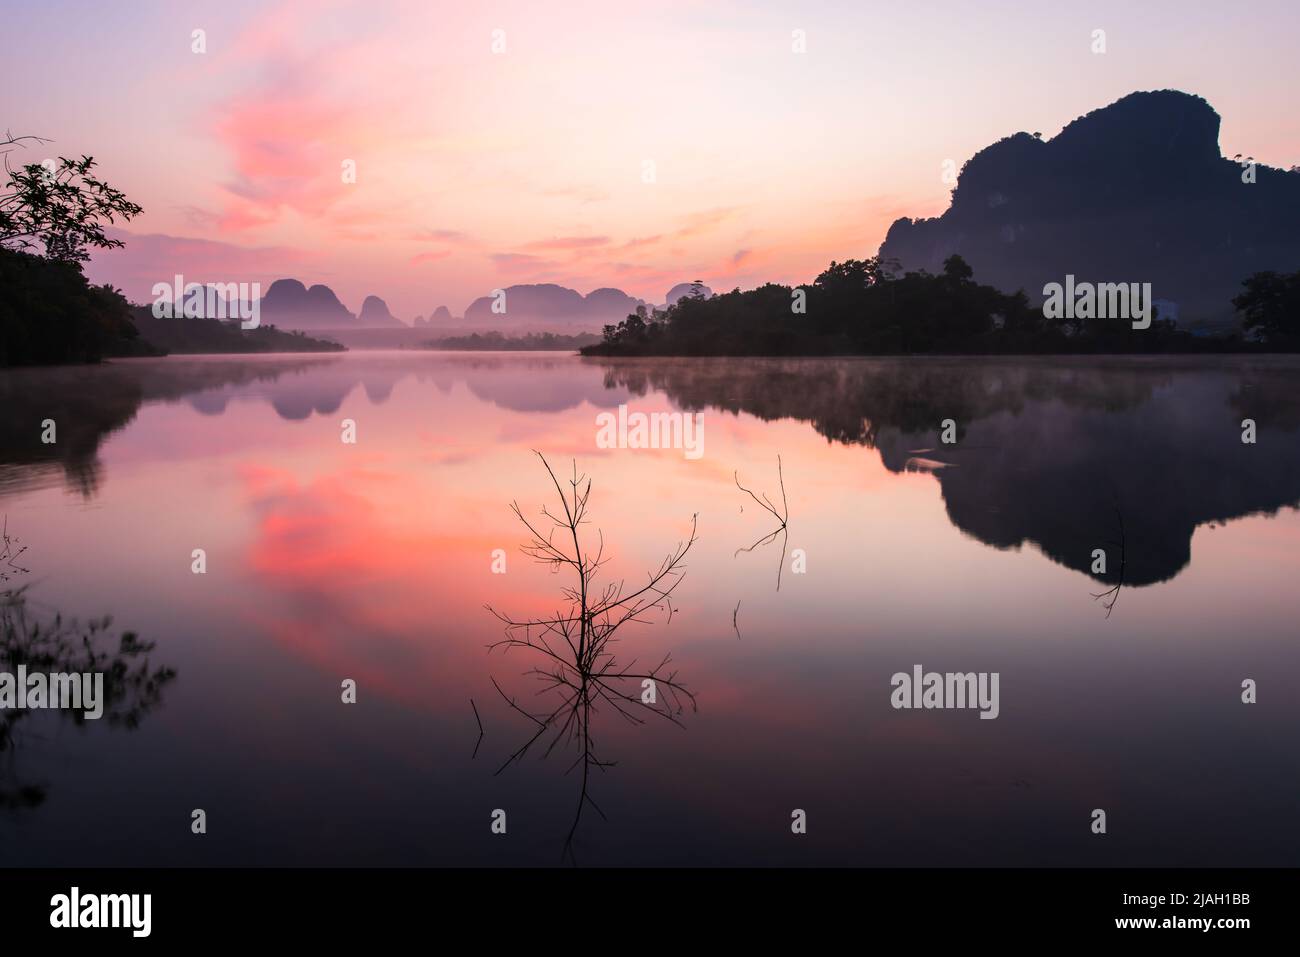 Landscape of the tropical lake during sunrise, dramatic clouds and sunrise sky reflection on the lake, morning mist covering mountains in background. Stock Photo